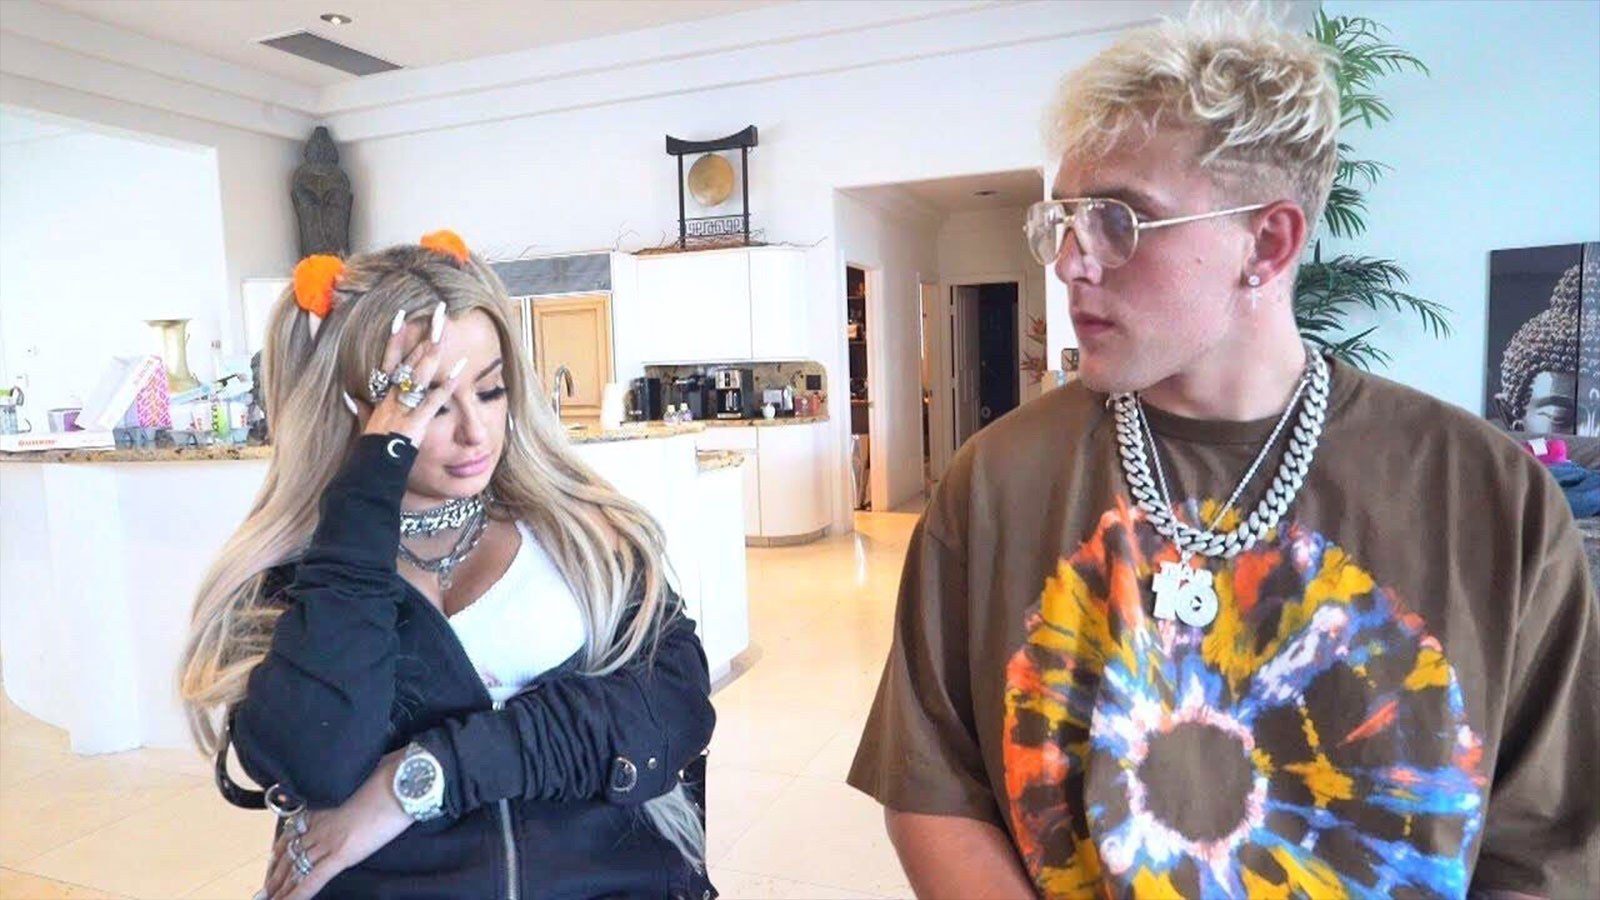 Fans Demand Refunds For Unwatchable Jake Paul And Tana Mongeau